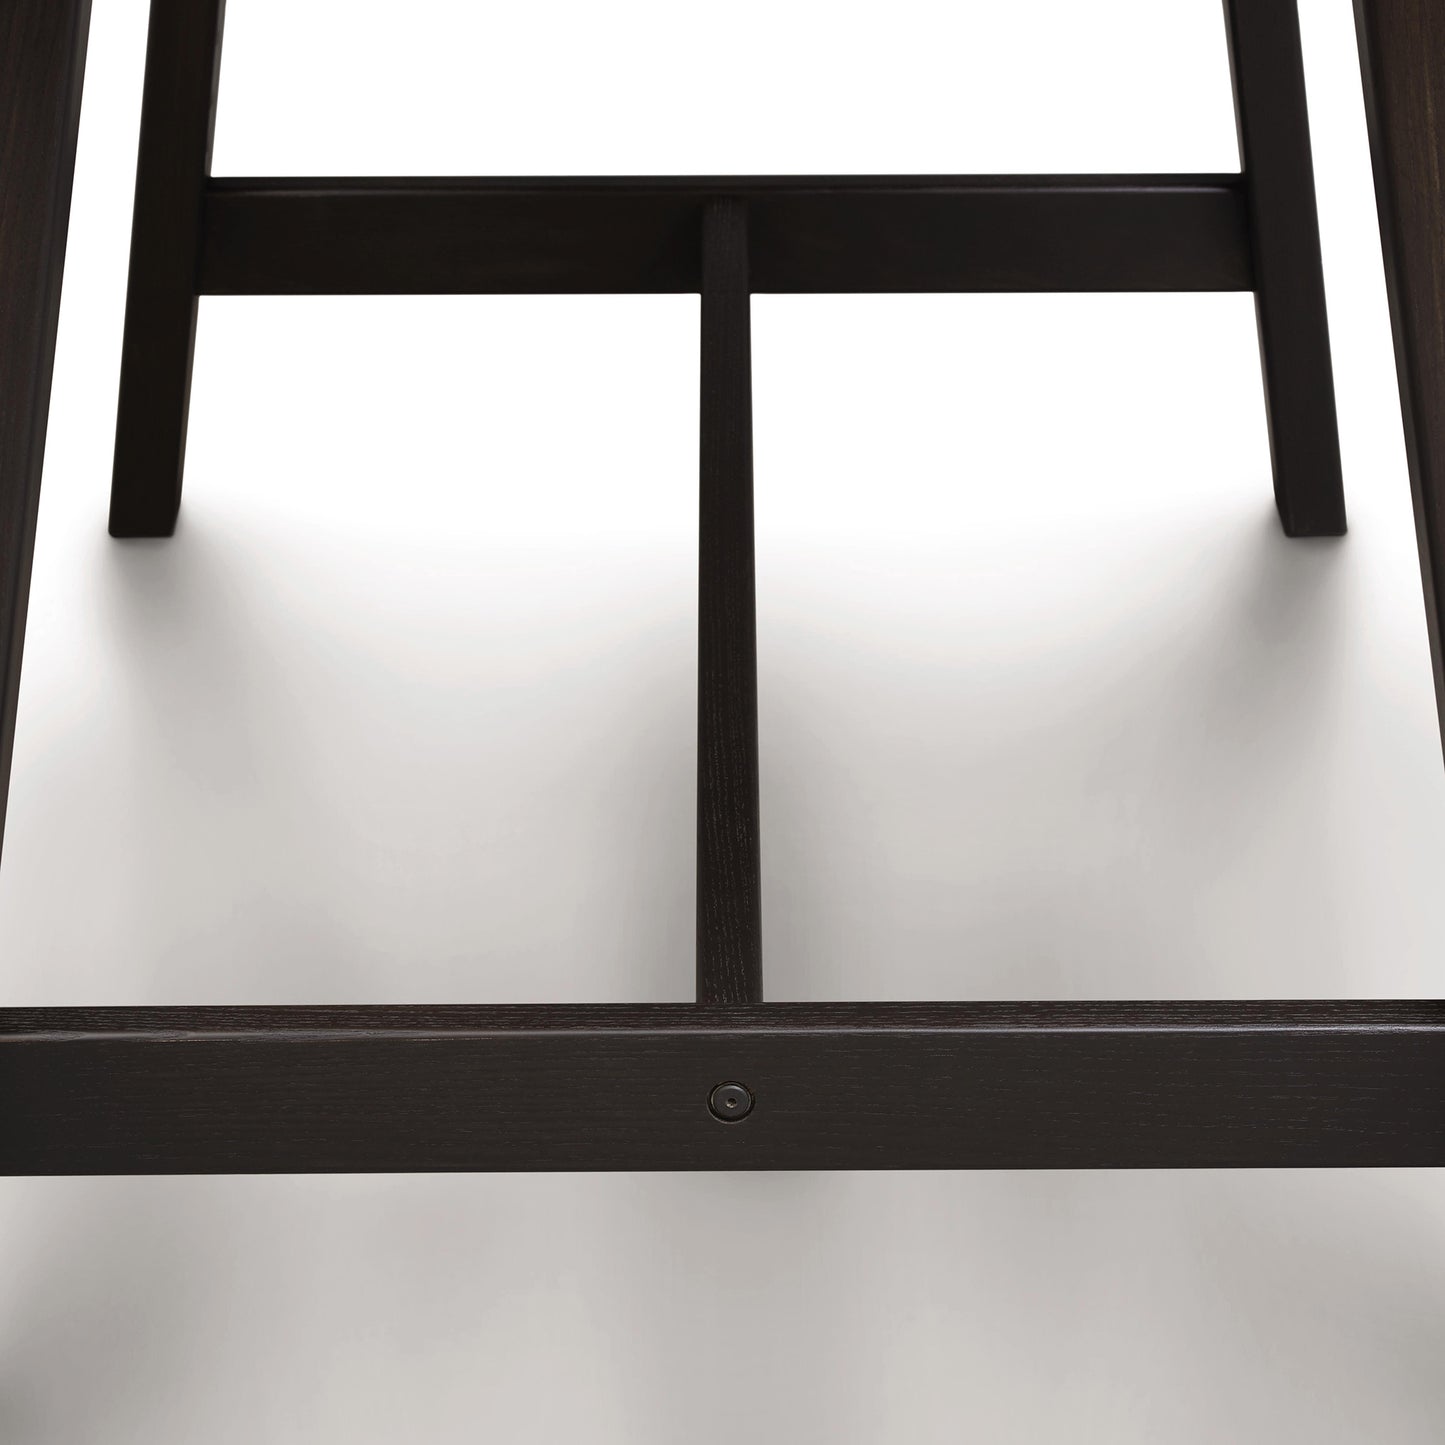 Close-up view of the lower part of a Copeland Furniture Modern Farmhouse Counter Height Farm Table with two legs and a cross beam, featuring a single visible screw, on a white background.